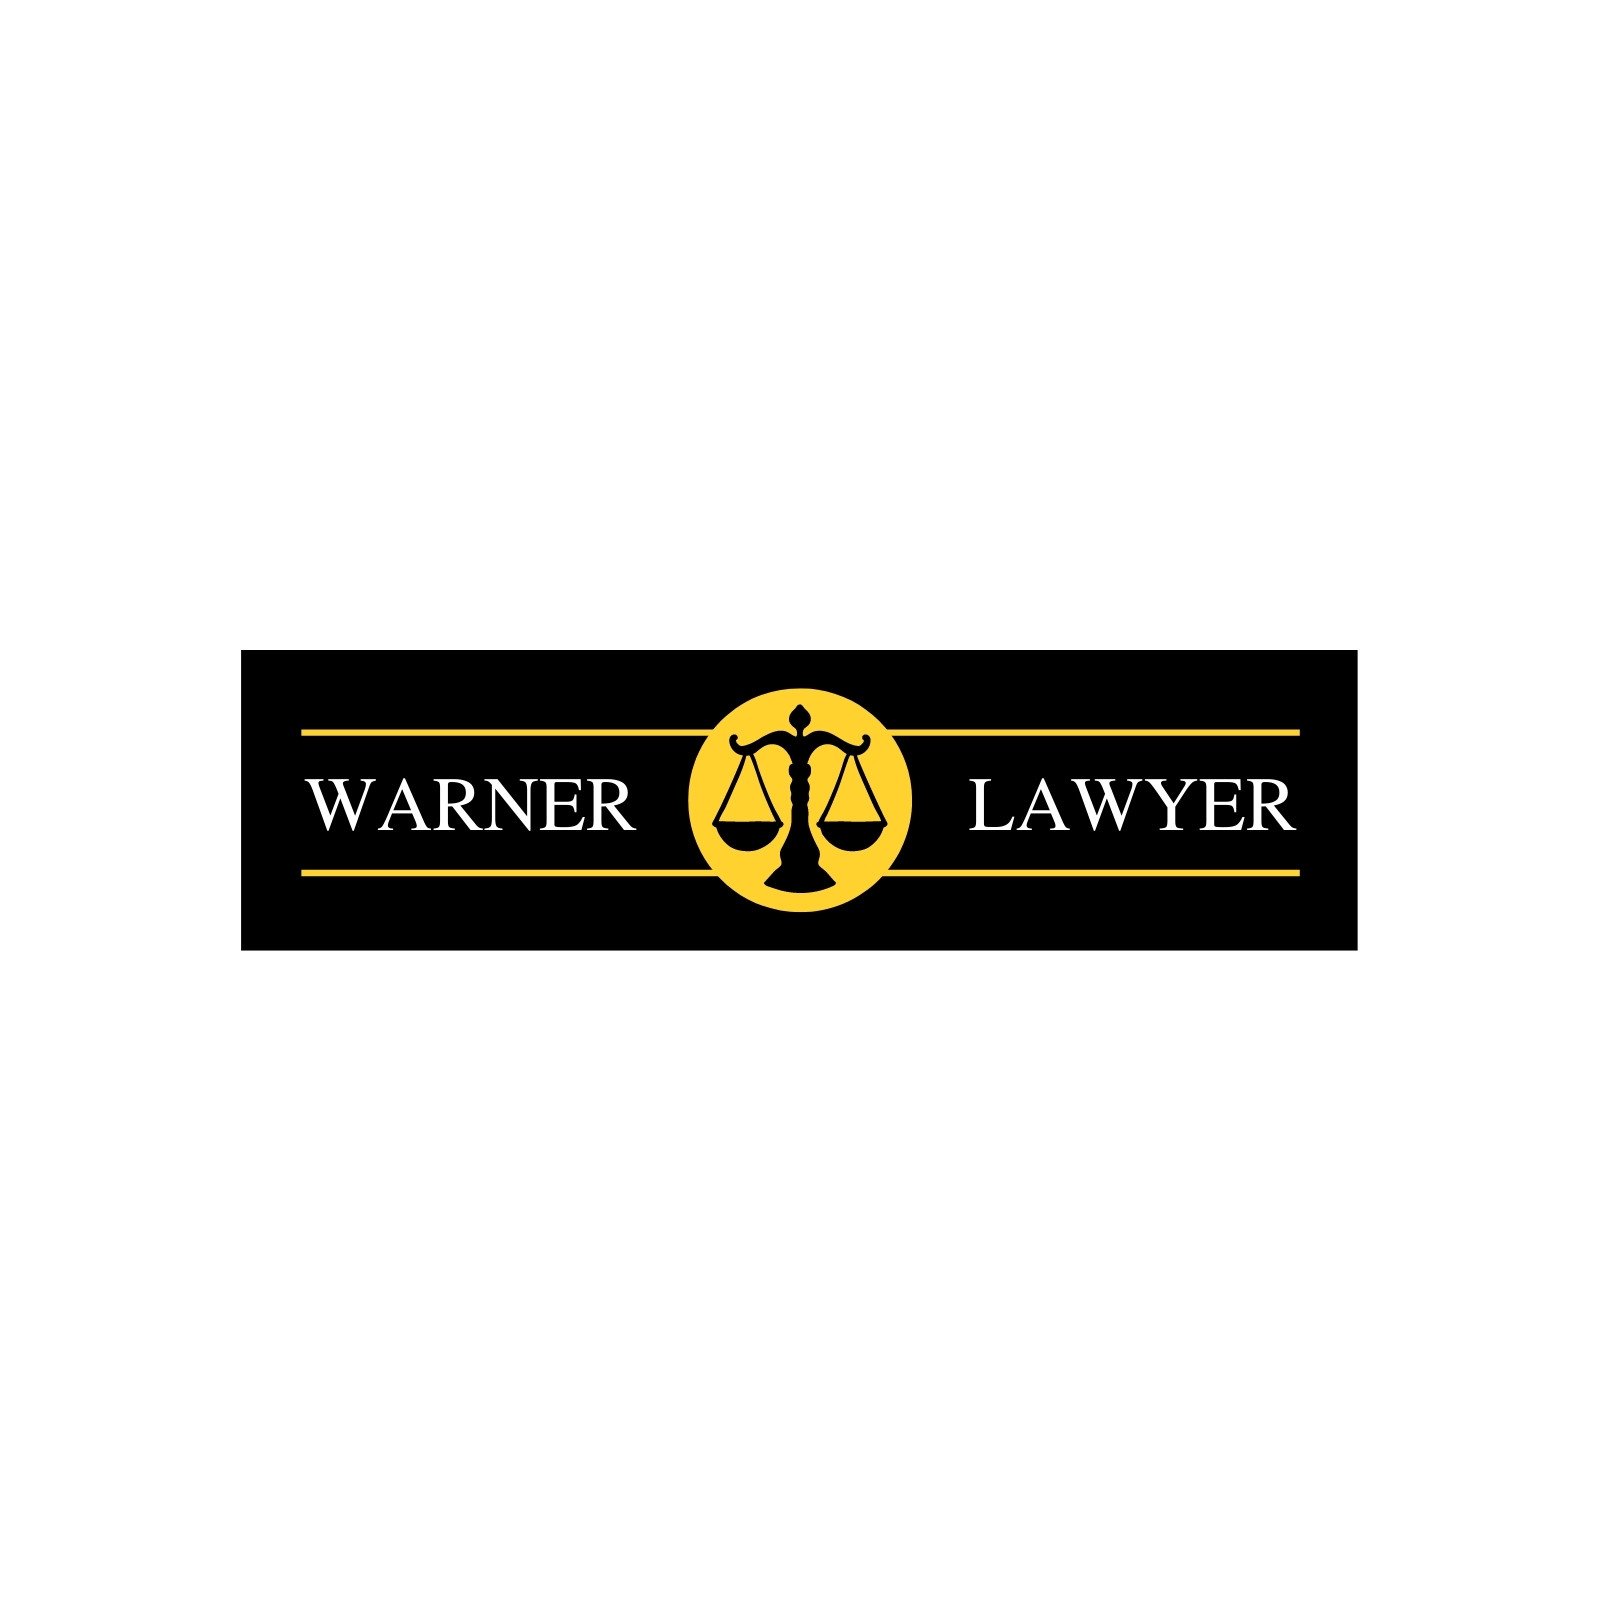 Law Logo Png Download - Lawyer Law Logo Png PNG Image | Transparent PNG  Free Download on SeekPNG